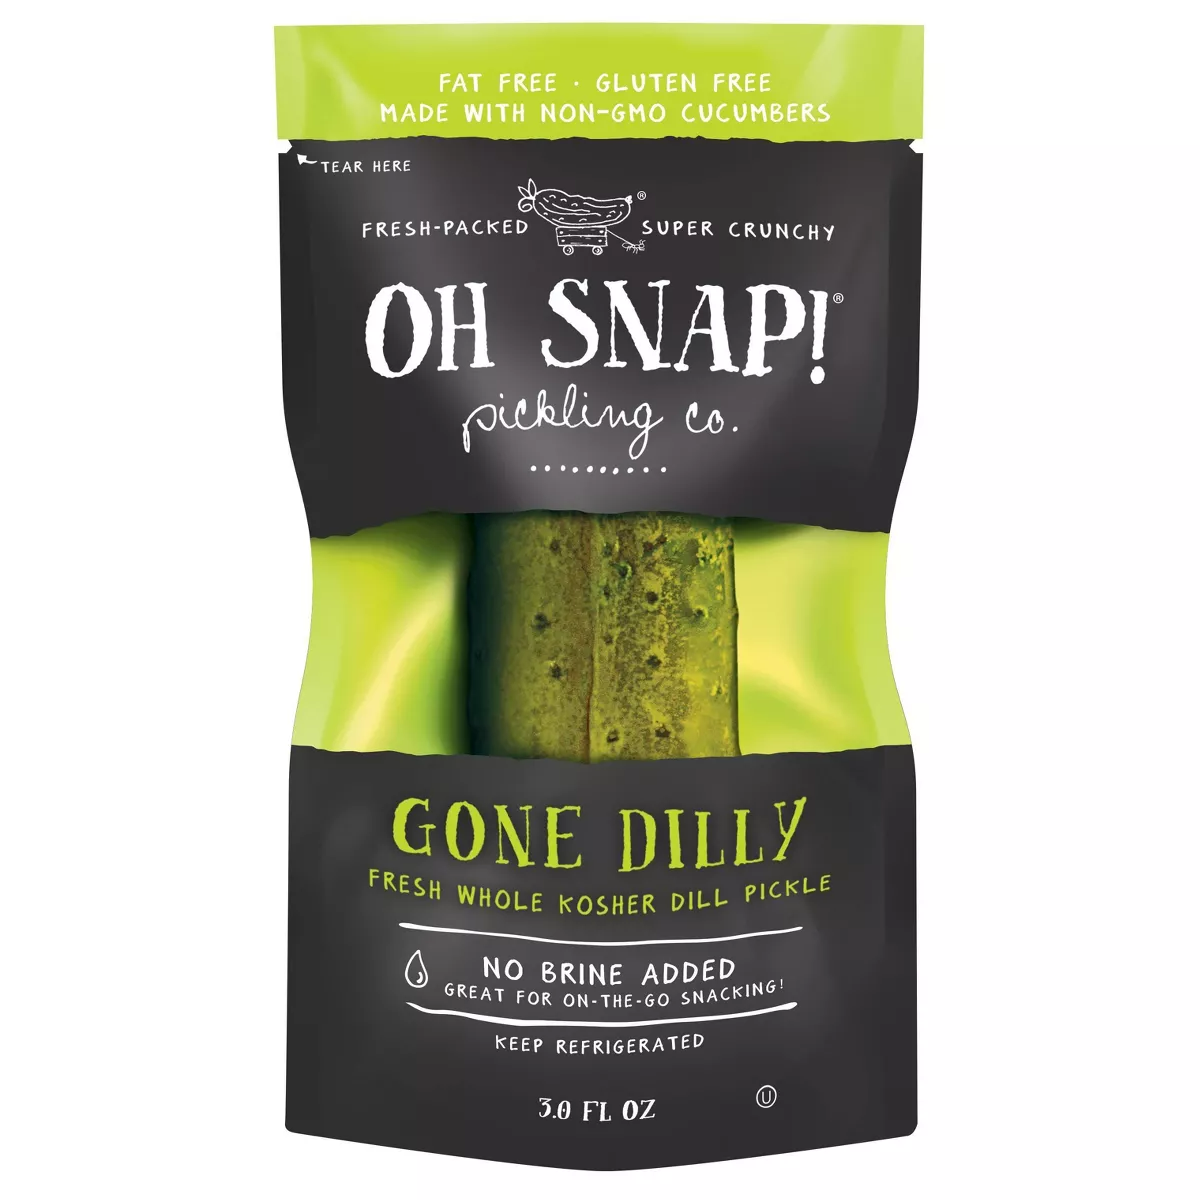 OH SNAP! Gone Dilly Whole Kosher Dill Pickle - 3 fl oz